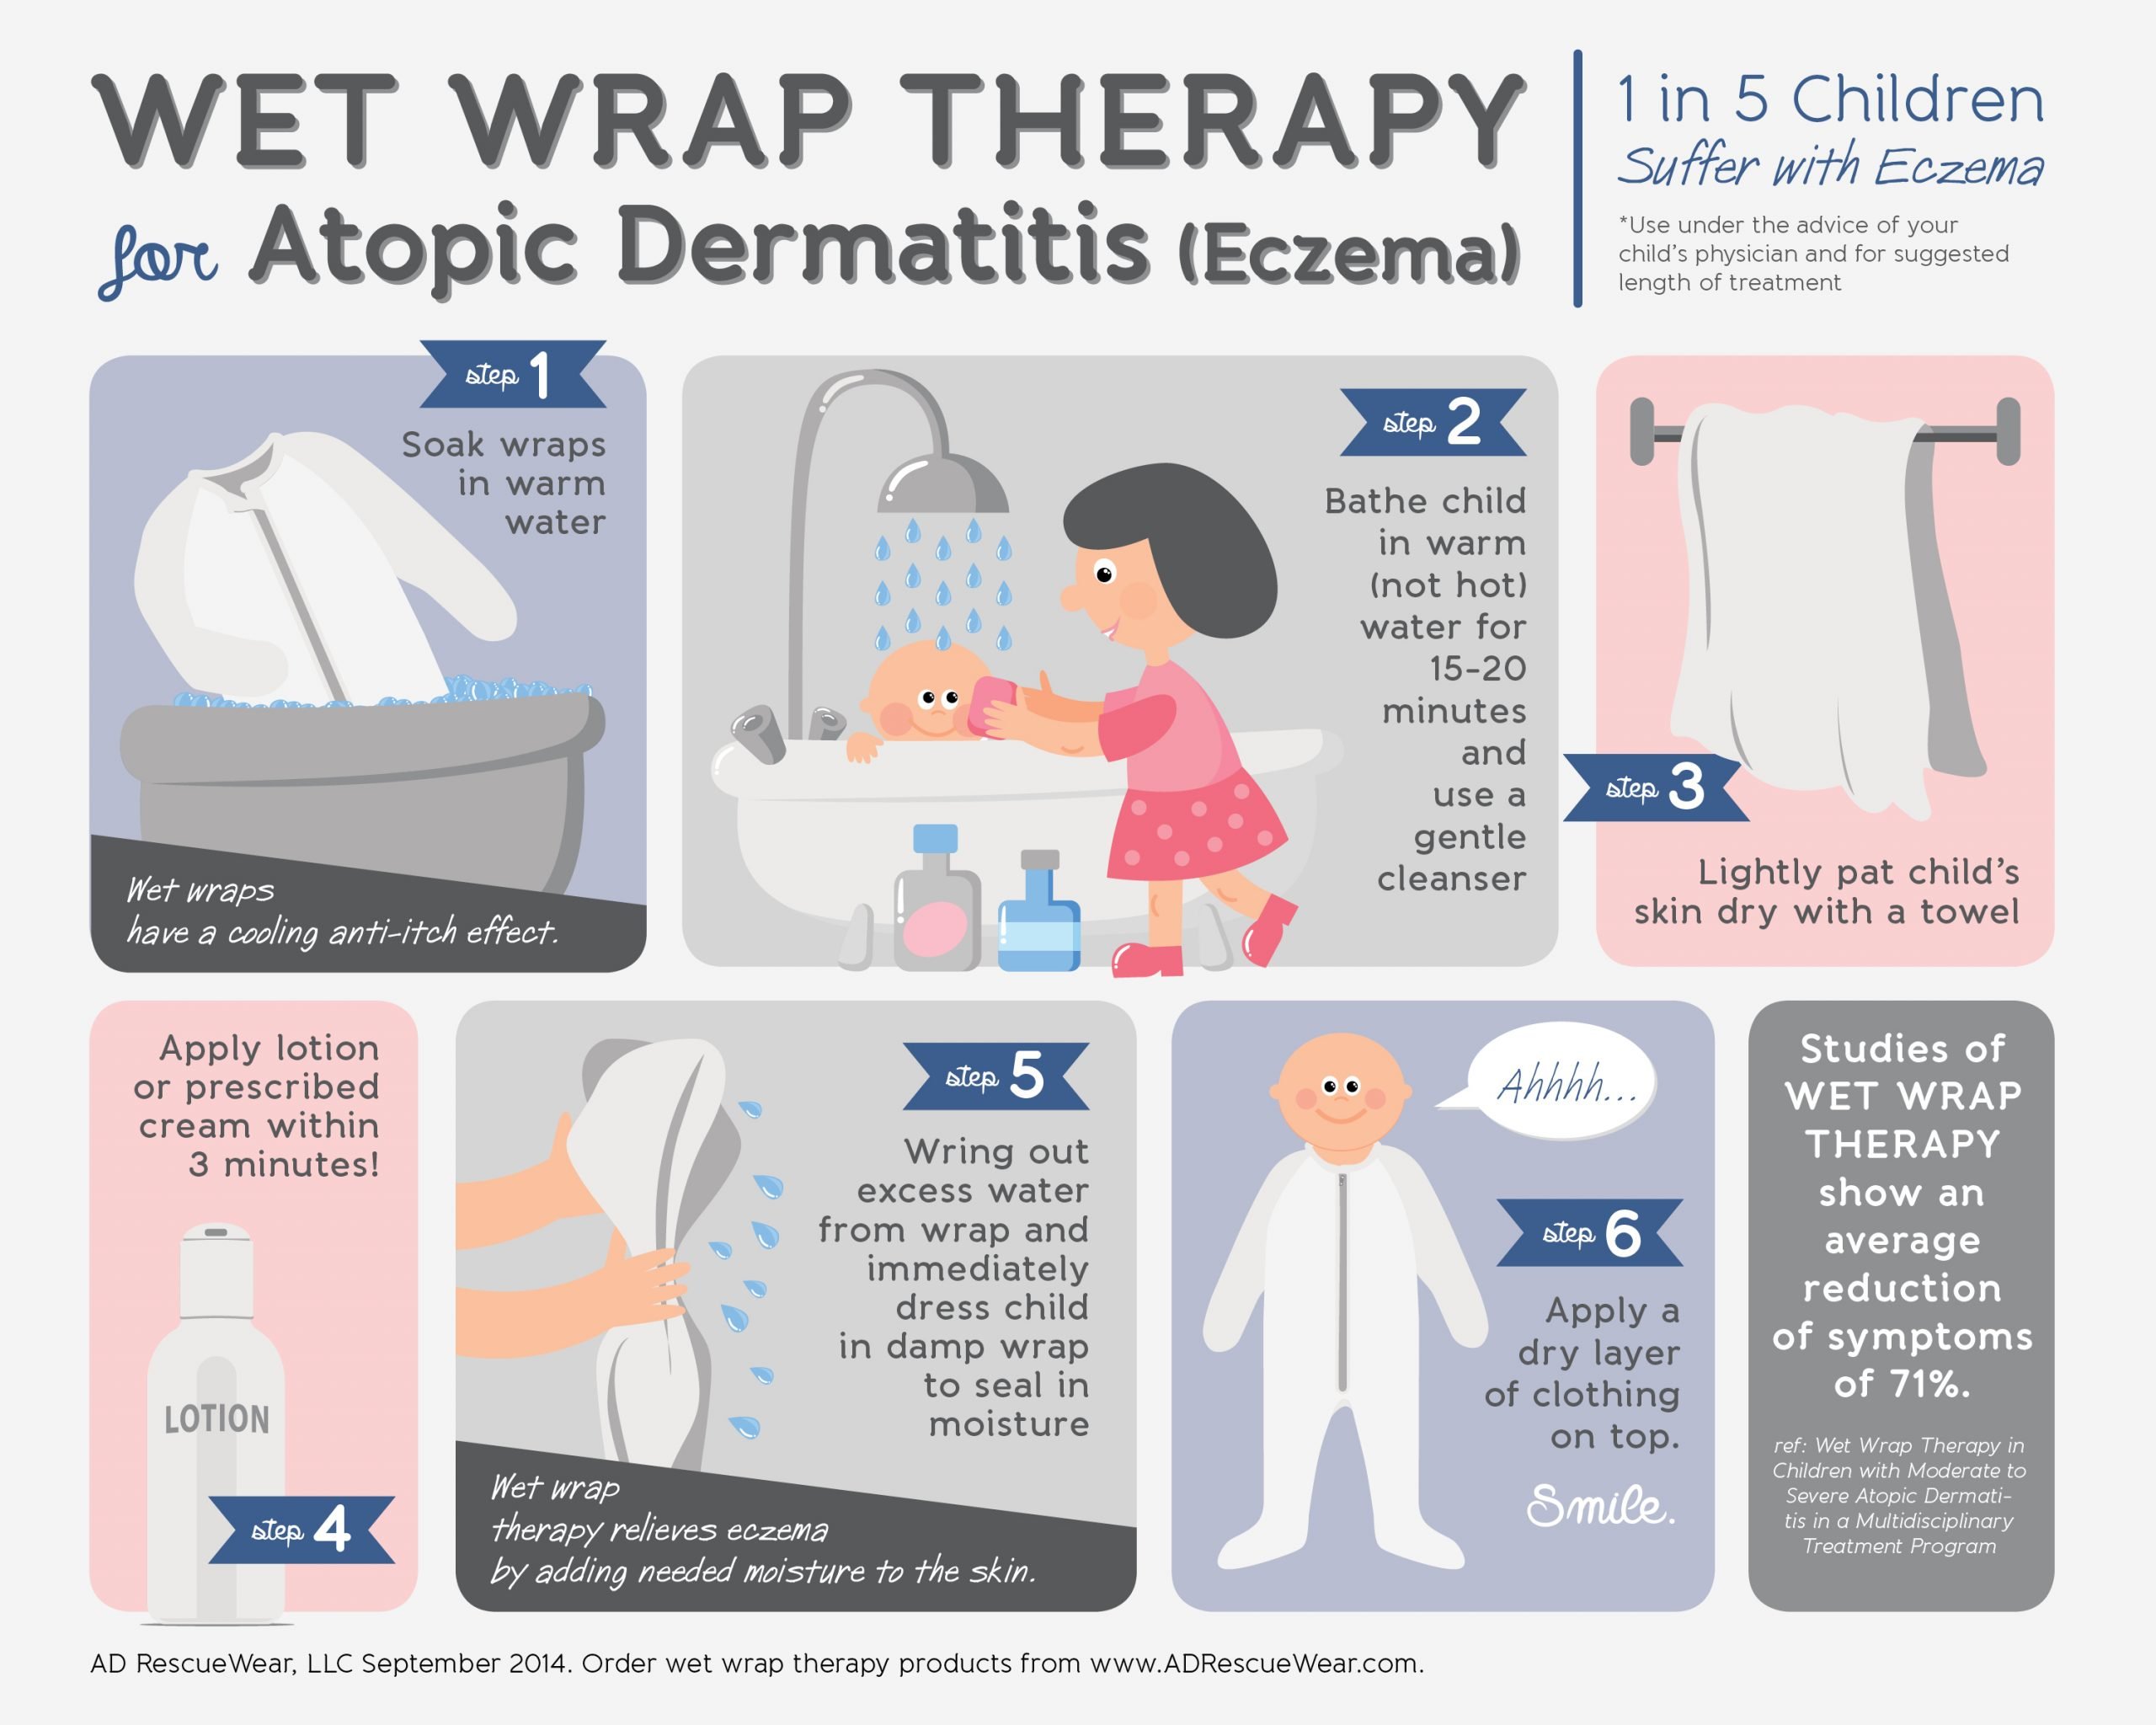 What Is Wet Wrap Therapy for Eczema